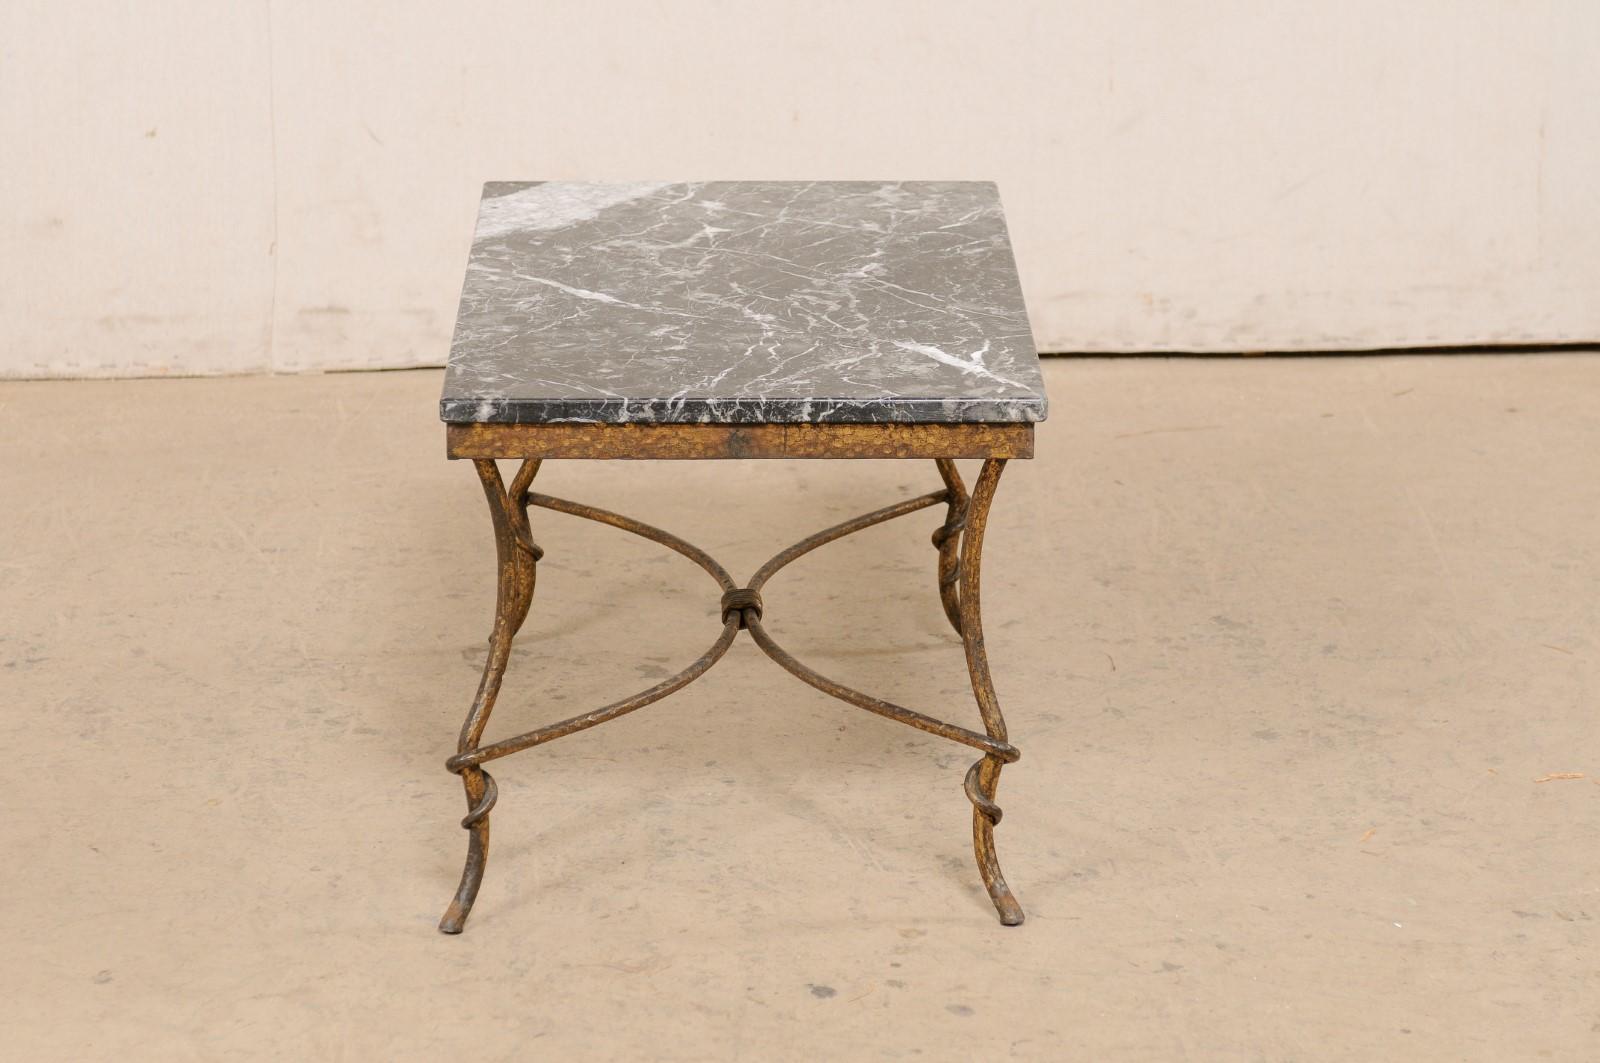 20th Century Spanish Marble-Top Rectangular Coffee Table w/Hammered Gold-Tone Iron Base For Sale